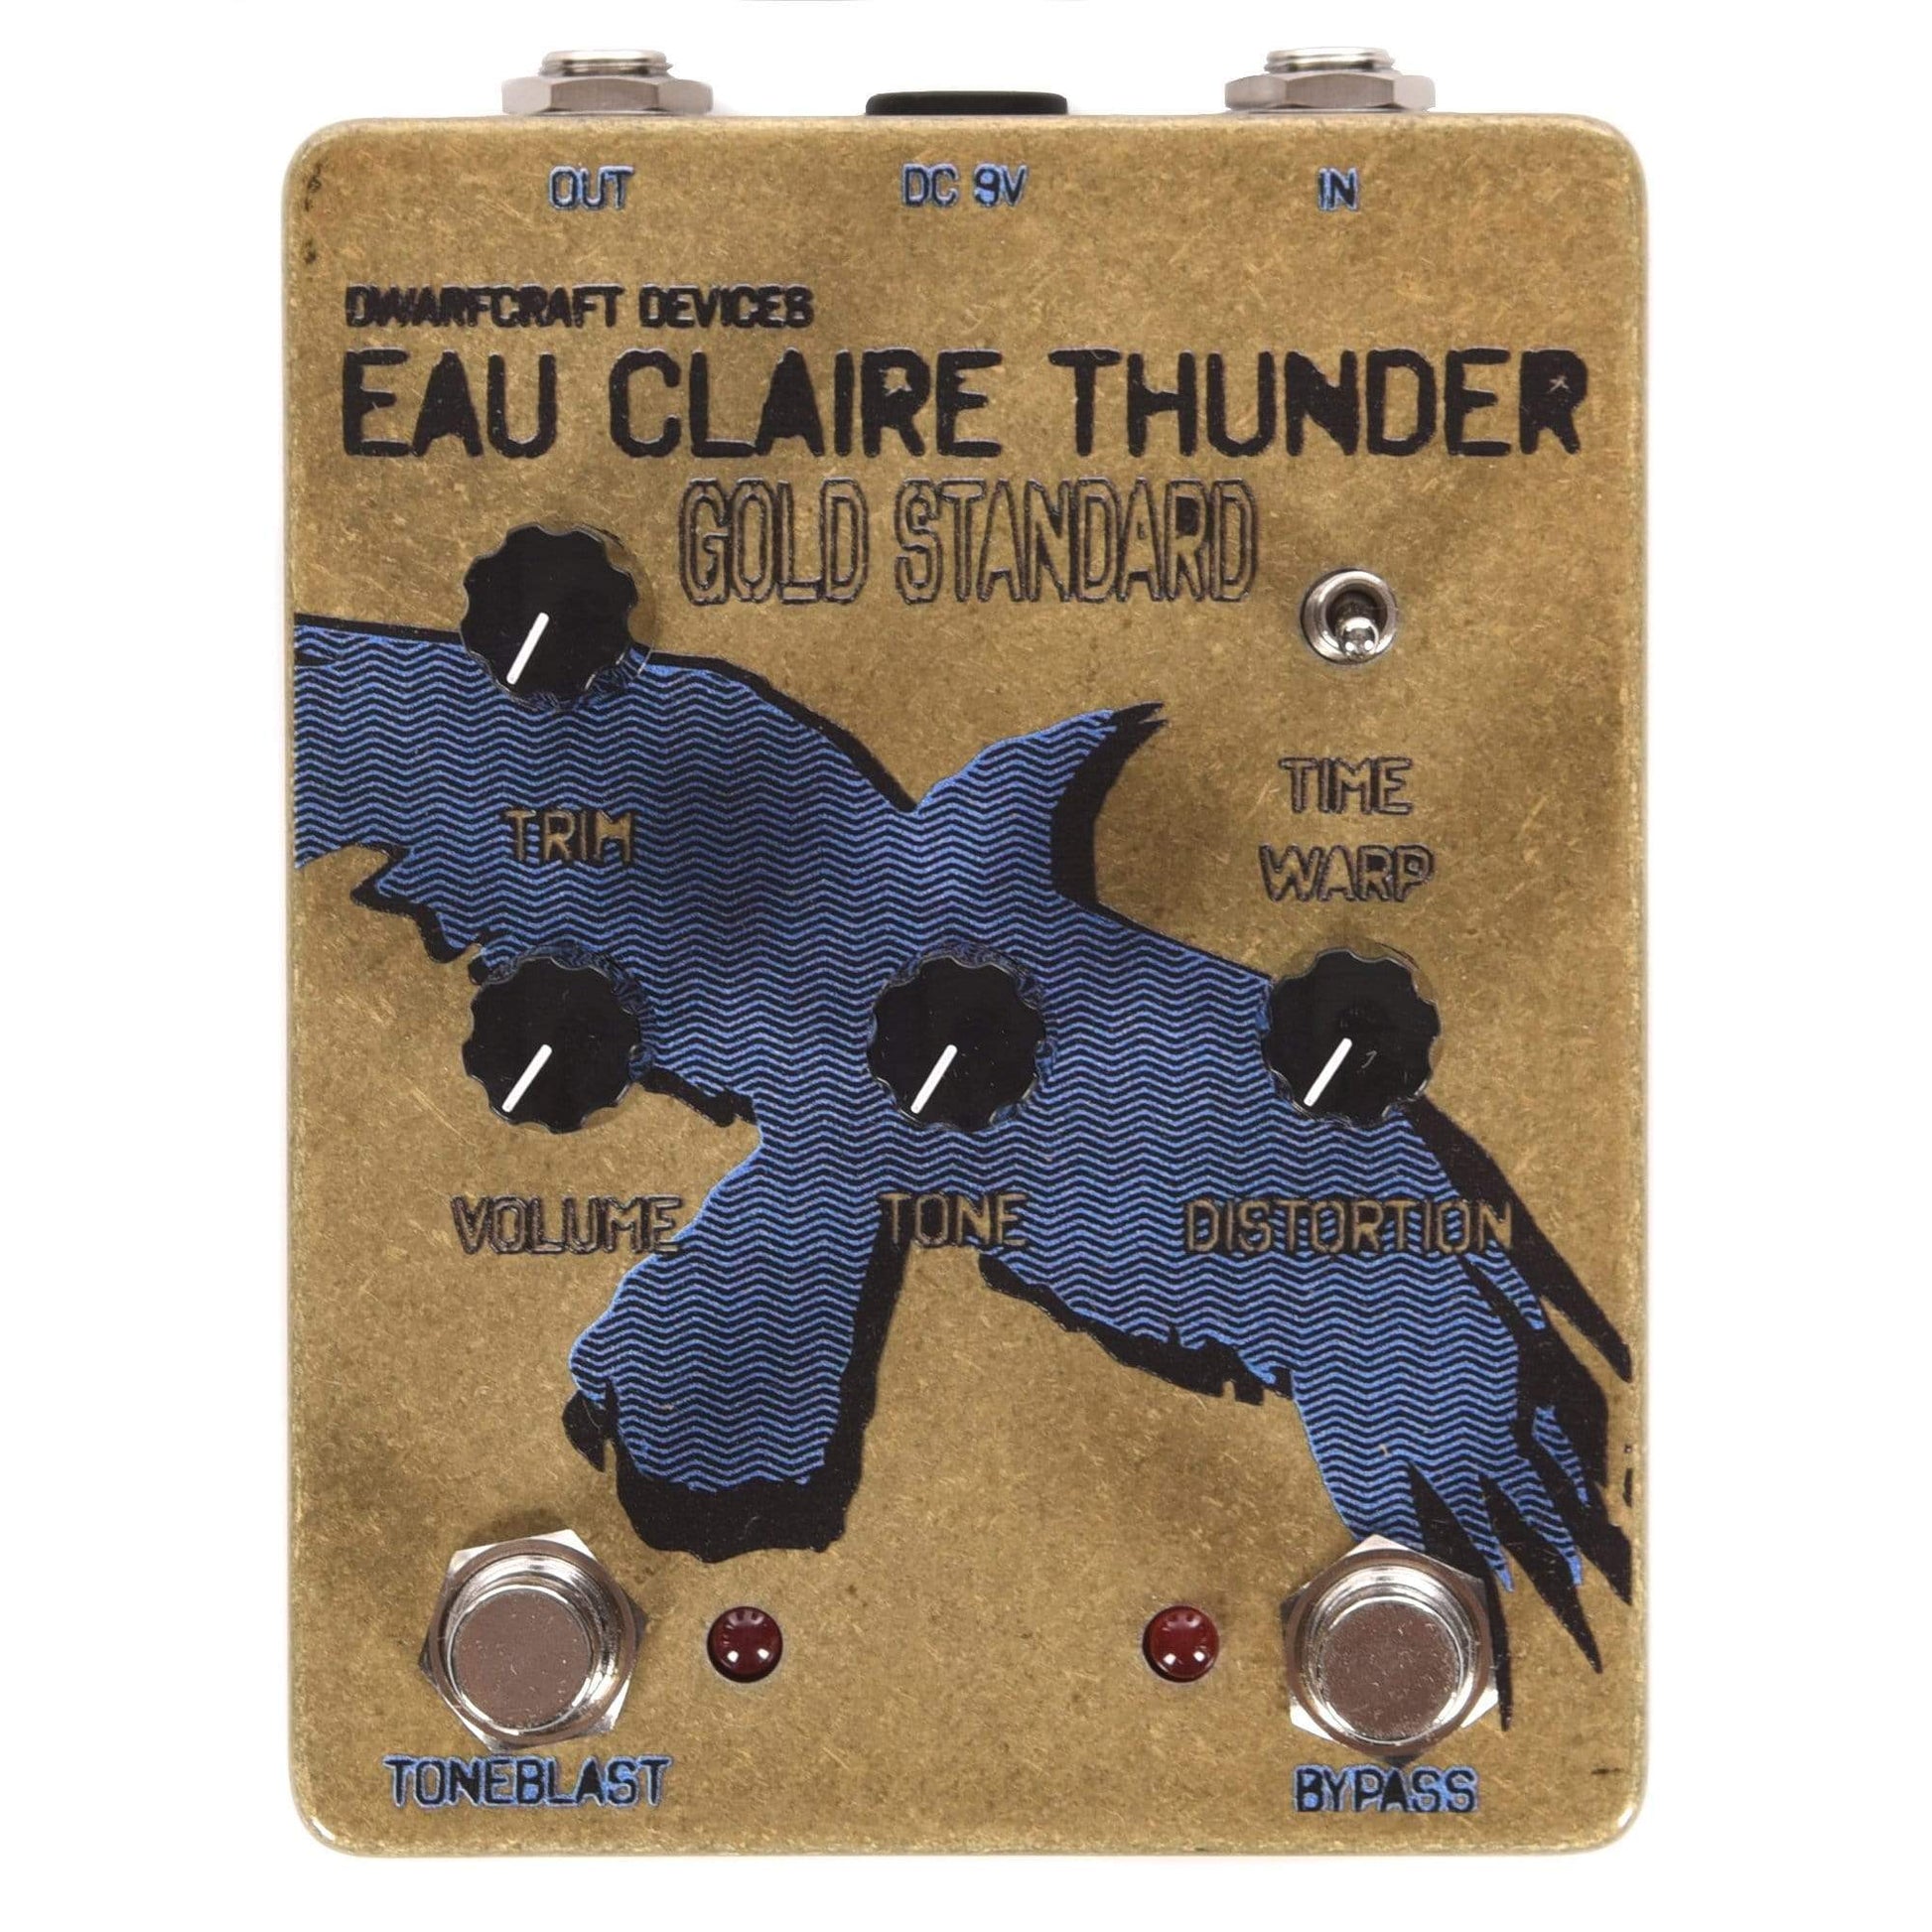 Dwarfcraft Devices Gold Standard Eau Claire Thunder LTD Edition Effects and Pedals / Fuzz